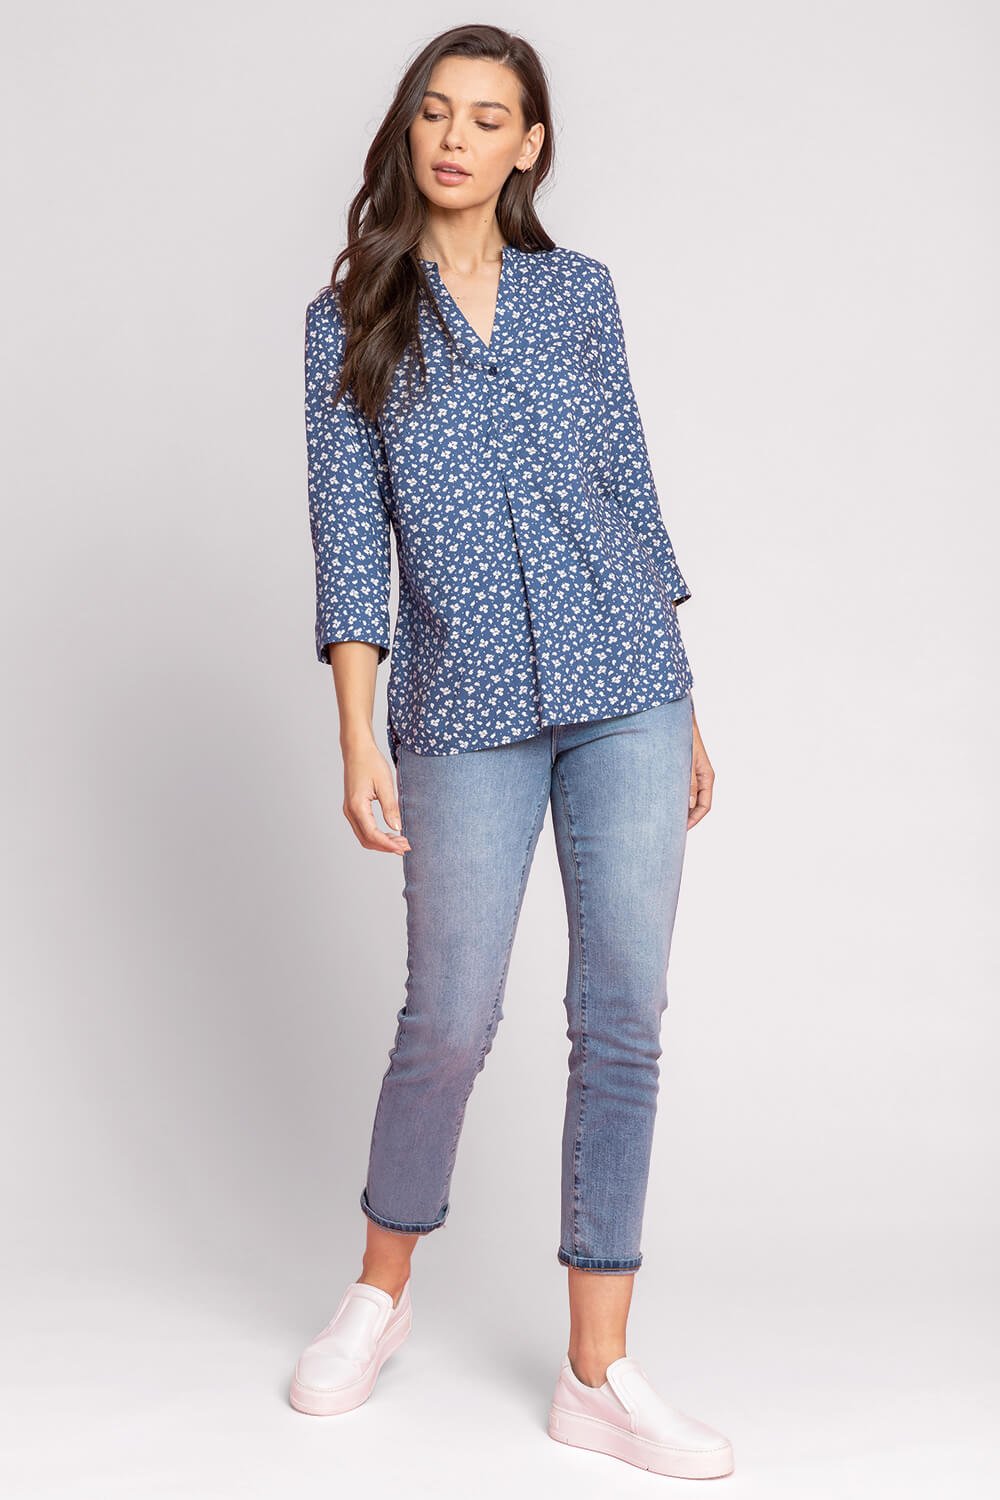 Blue Ditsy Floral Print Notch Neck Top, Image 3 of 5